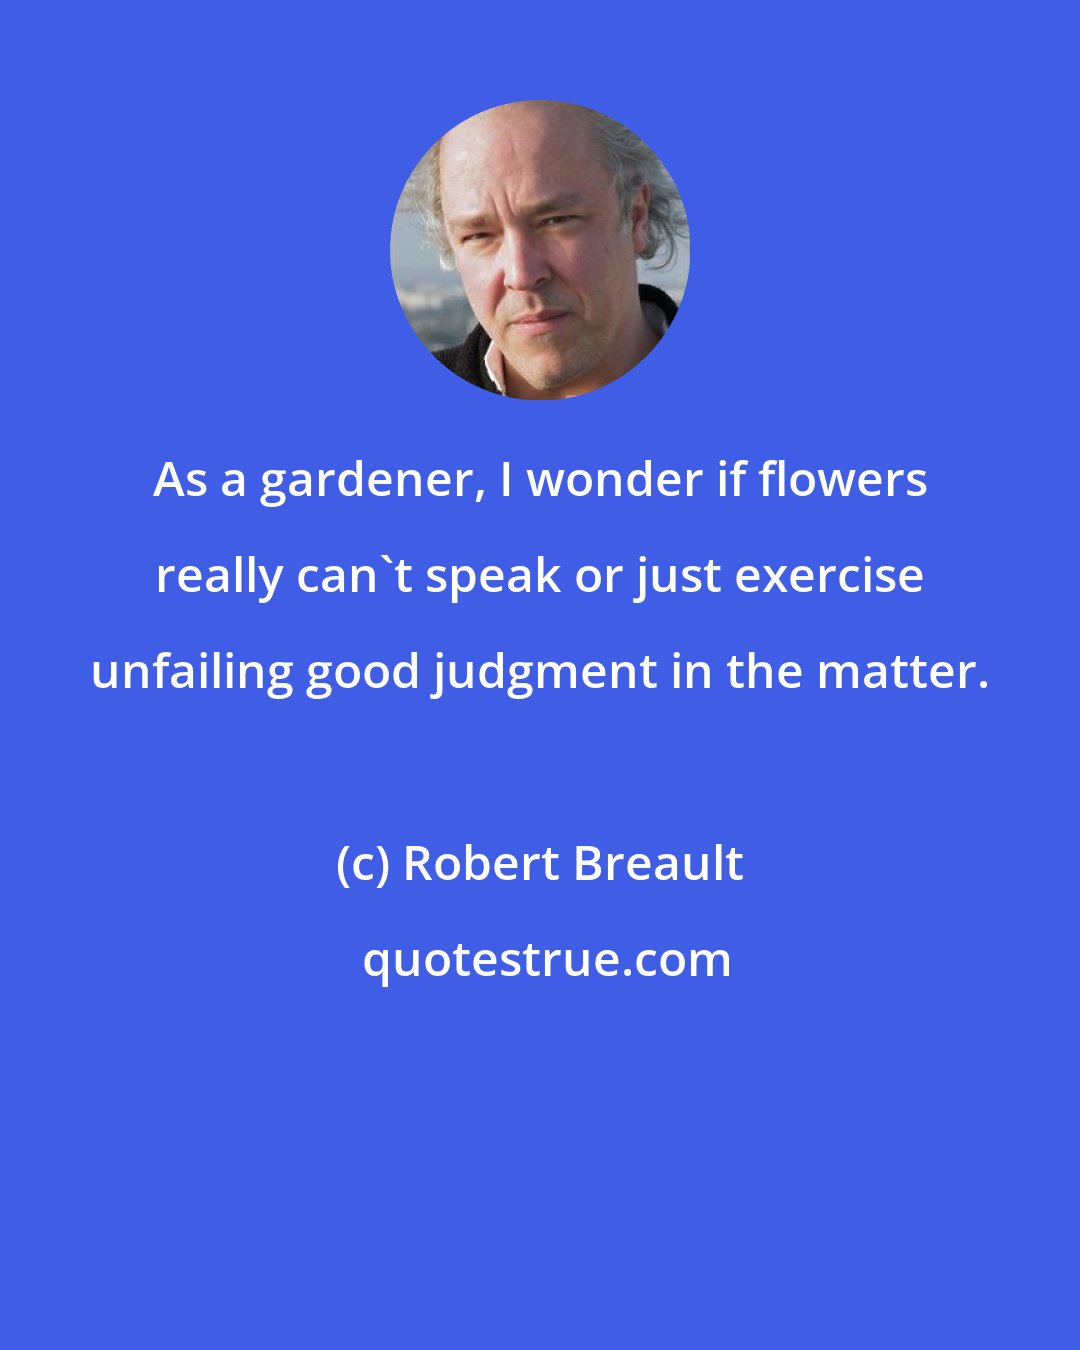 Robert Breault: As a gardener, I wonder if flowers really can't speak or just exercise unfailing good judgment in the matter.